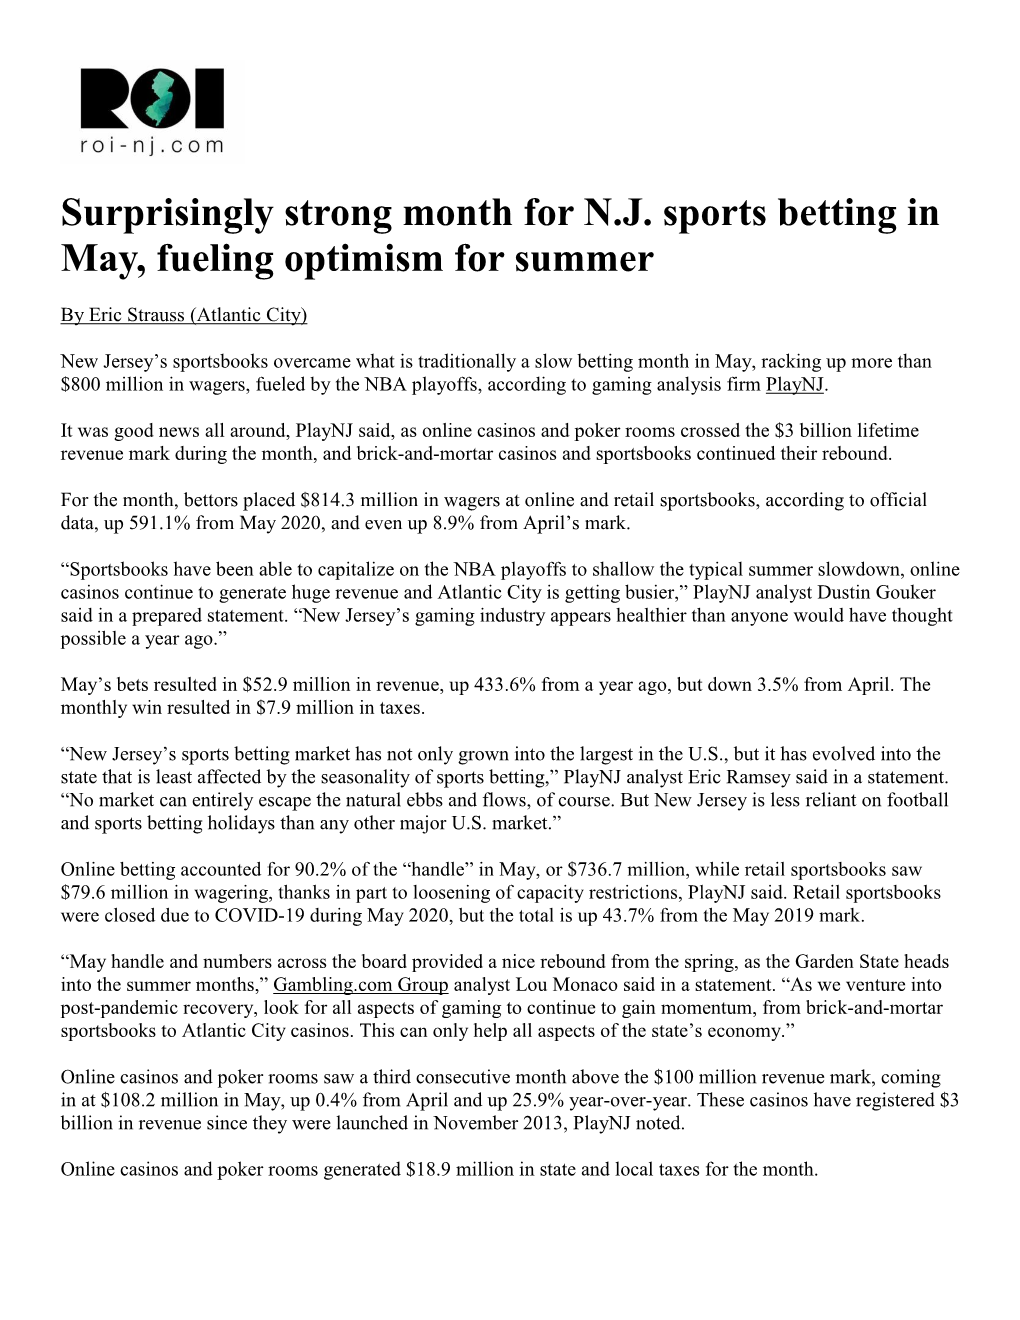 Surprisingly Strong Month for N.J. Sports Betting in May, Fueling Optimism for Summer